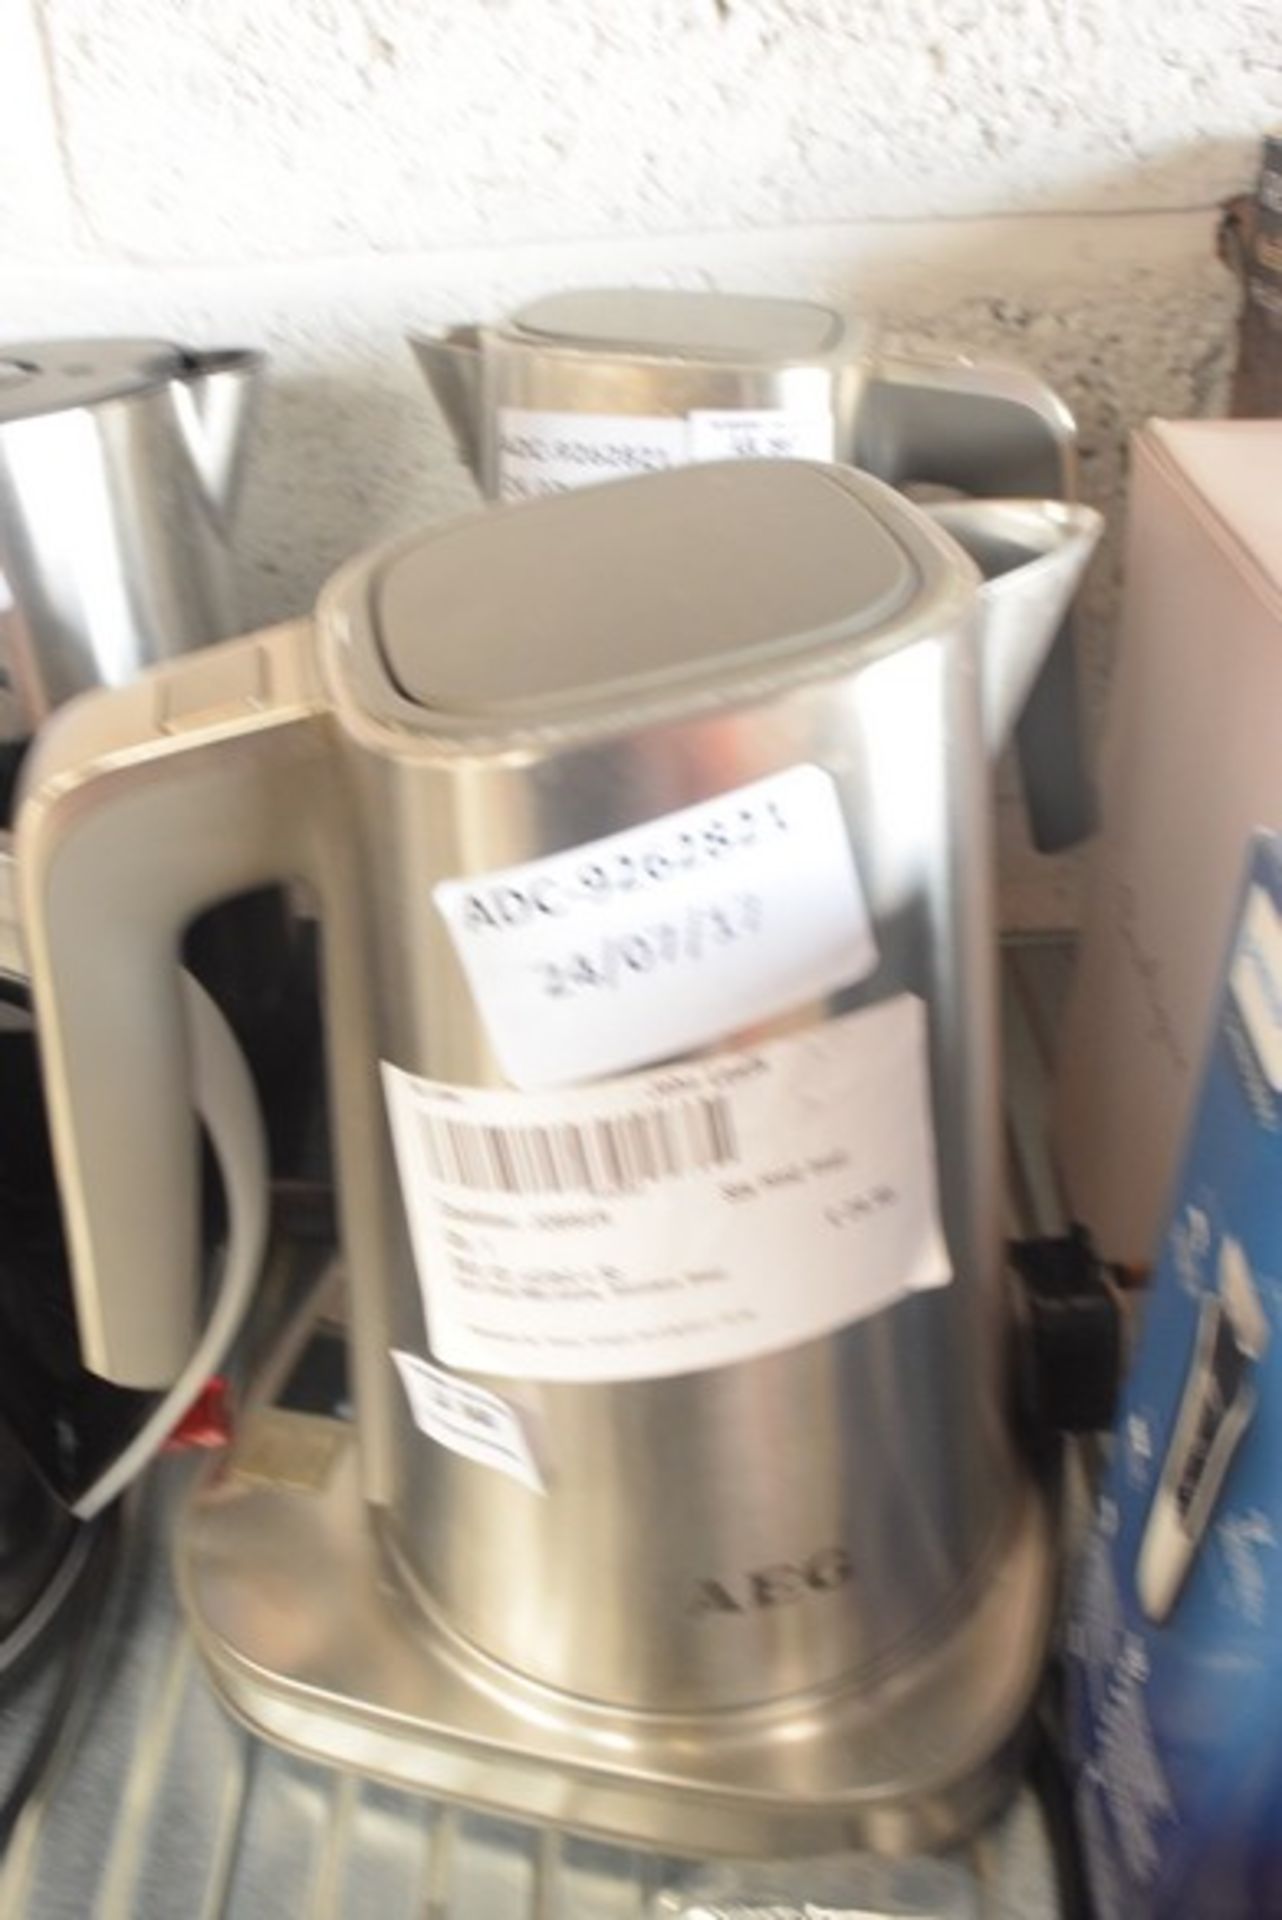 1 x AEG STAINLESS STEEL KETTLE RRP £30 24/07/17 *PLEASE NOTE THAT THE BID PRICE IS MULTIPLIED BY THE